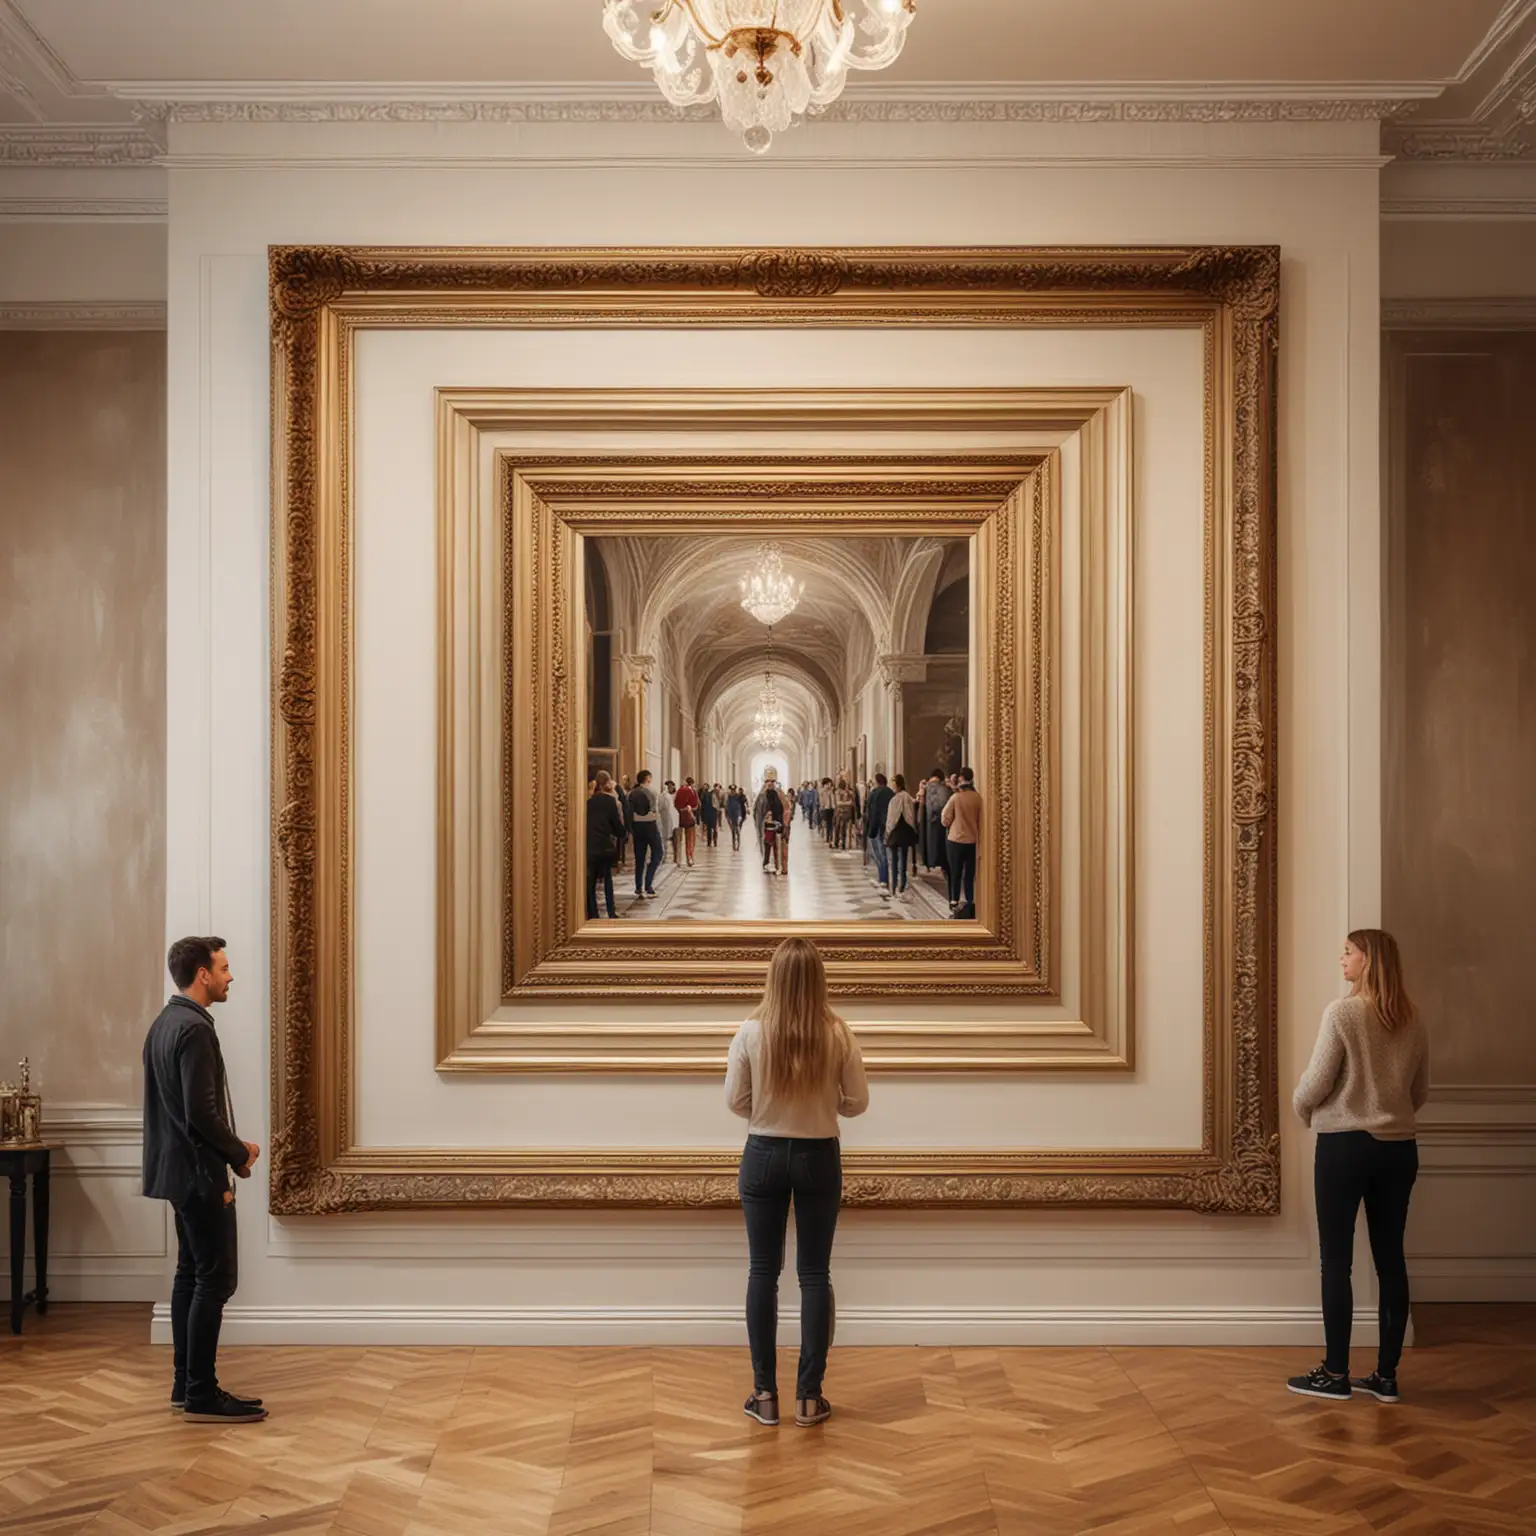 Luxurious Gallery with Central Square Painting and People